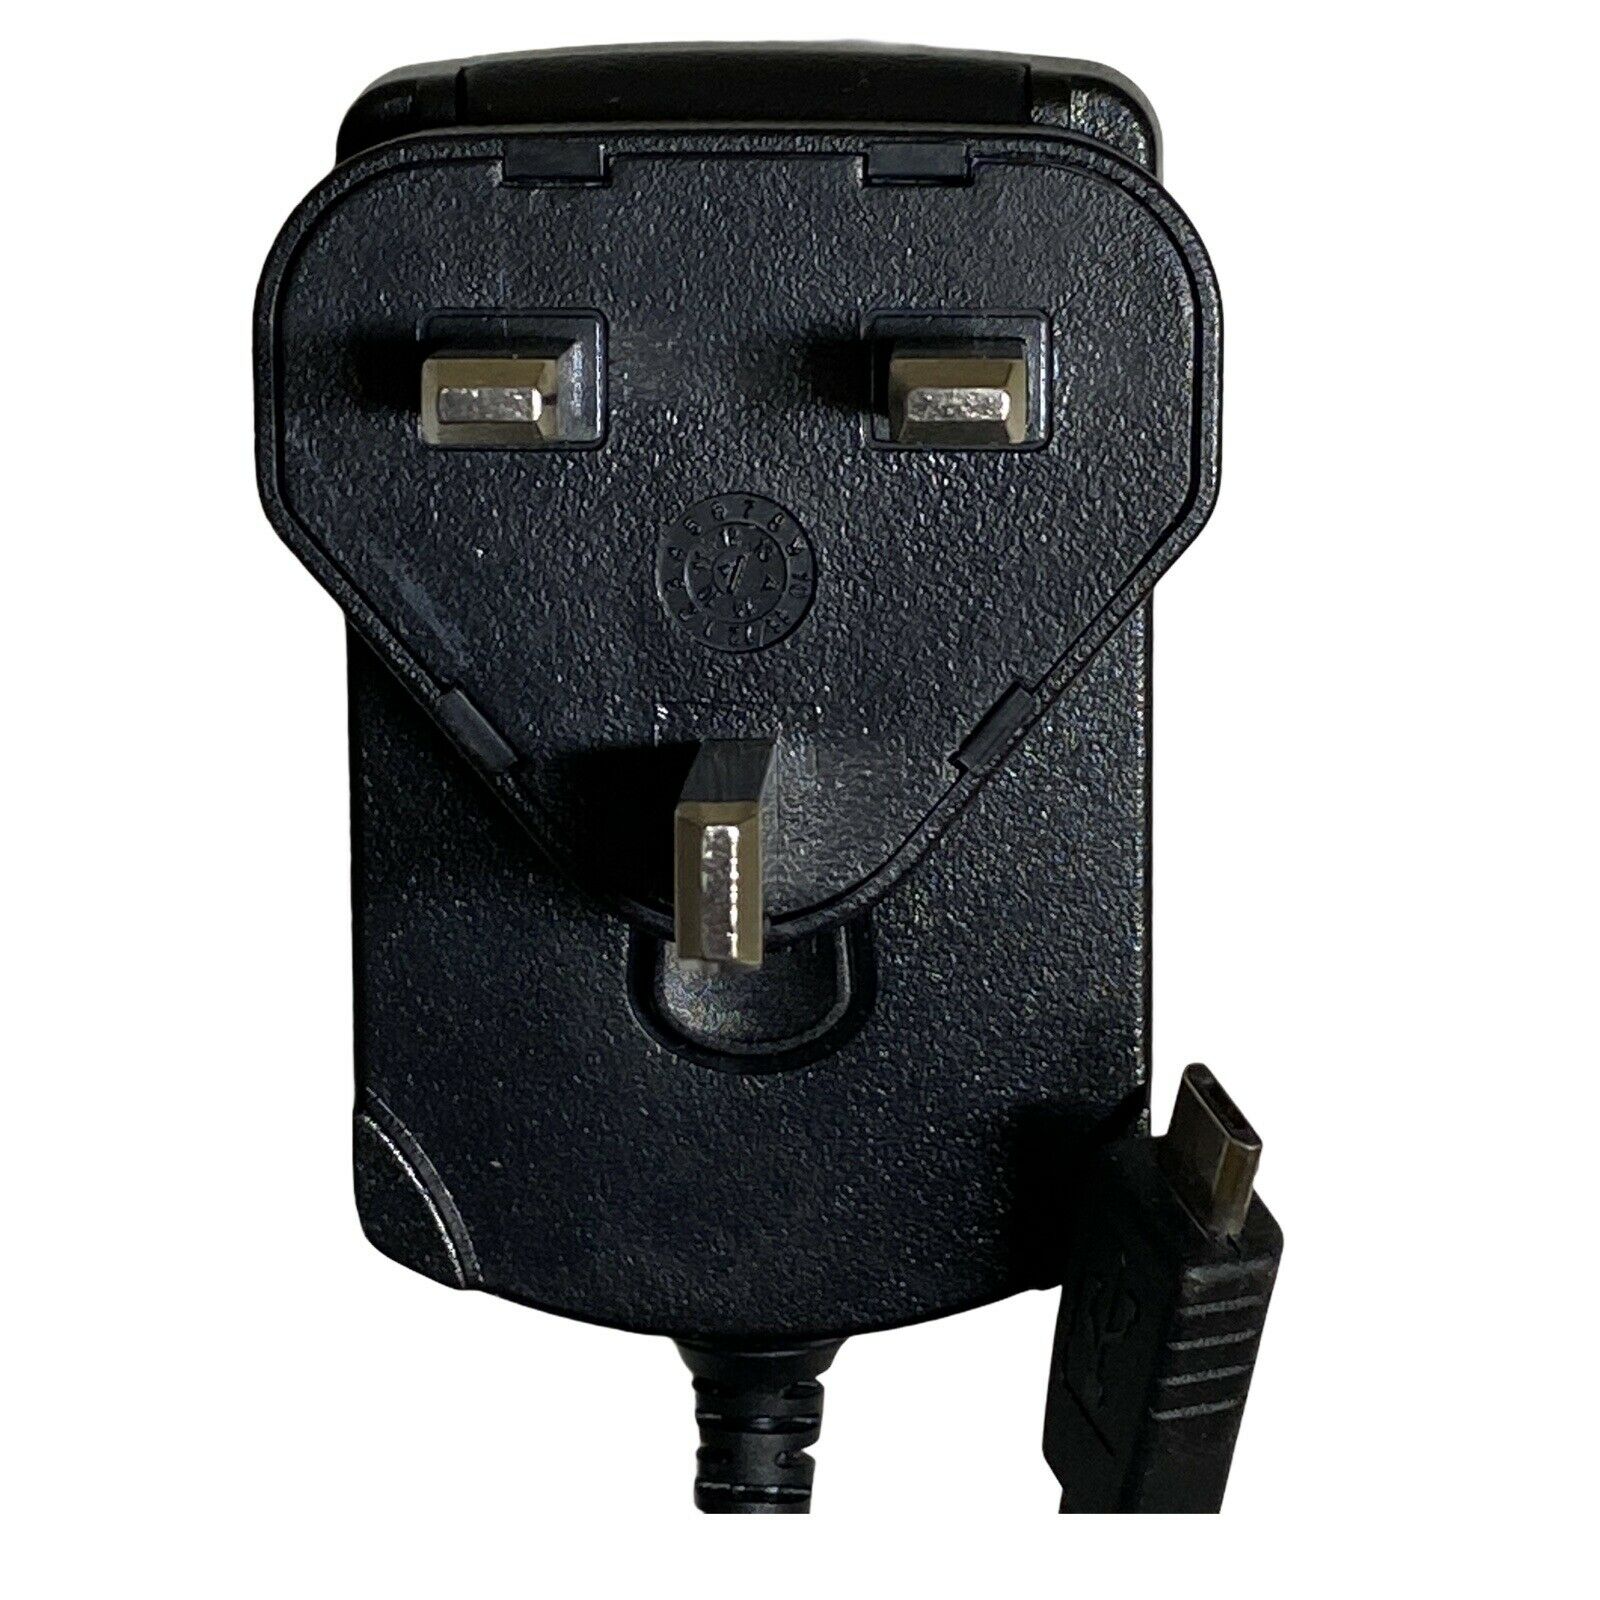 Genuine Kobo PSAC10R-050 Power Adapter UK Plug 5V 2A Brand: Kobo Compatible Brand: For Kobo Type: Power Adapter Un - Click Image to Close